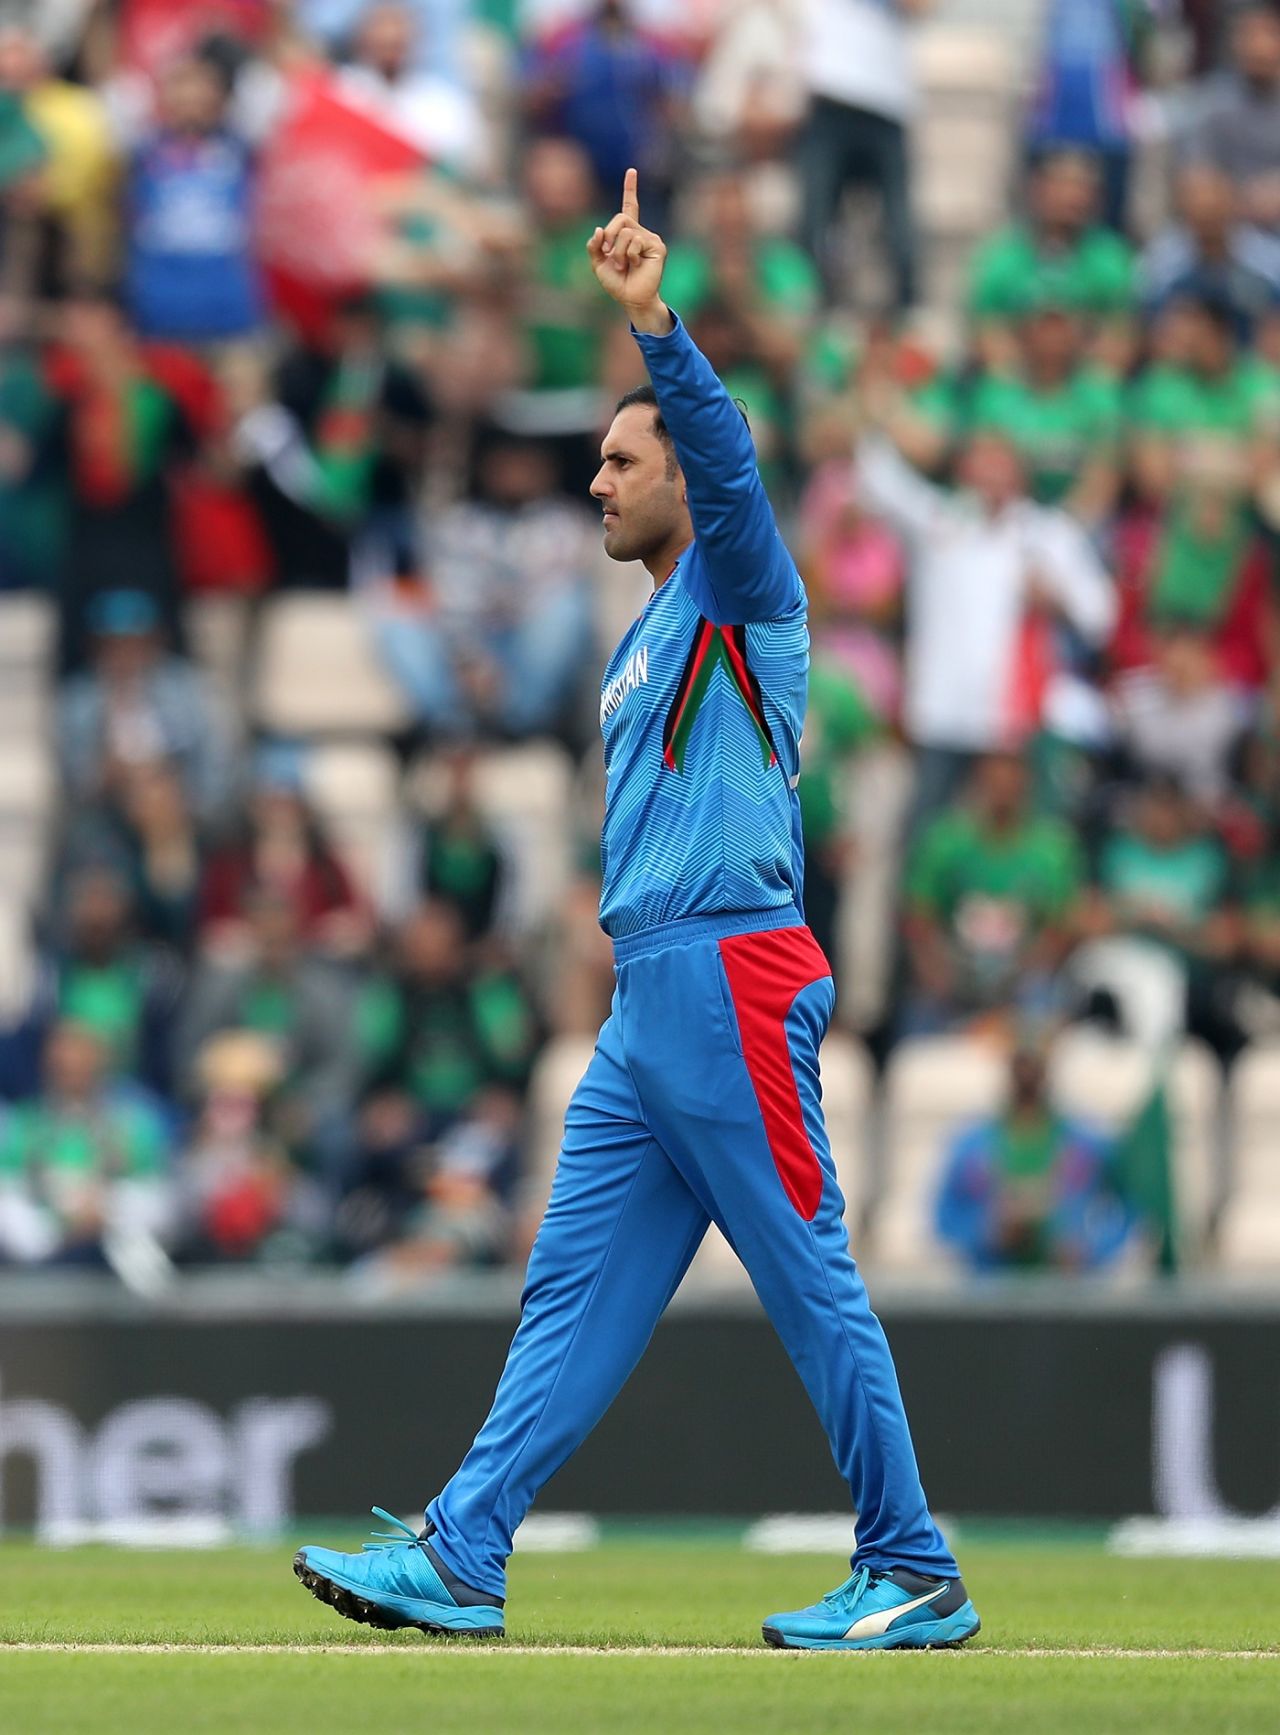 Mohammad Nabi picked up the crucial wicket of Tamim Iqbal, Afghanistan v Bangladesh, World Cup 2019, Southampton, June 24, 2019